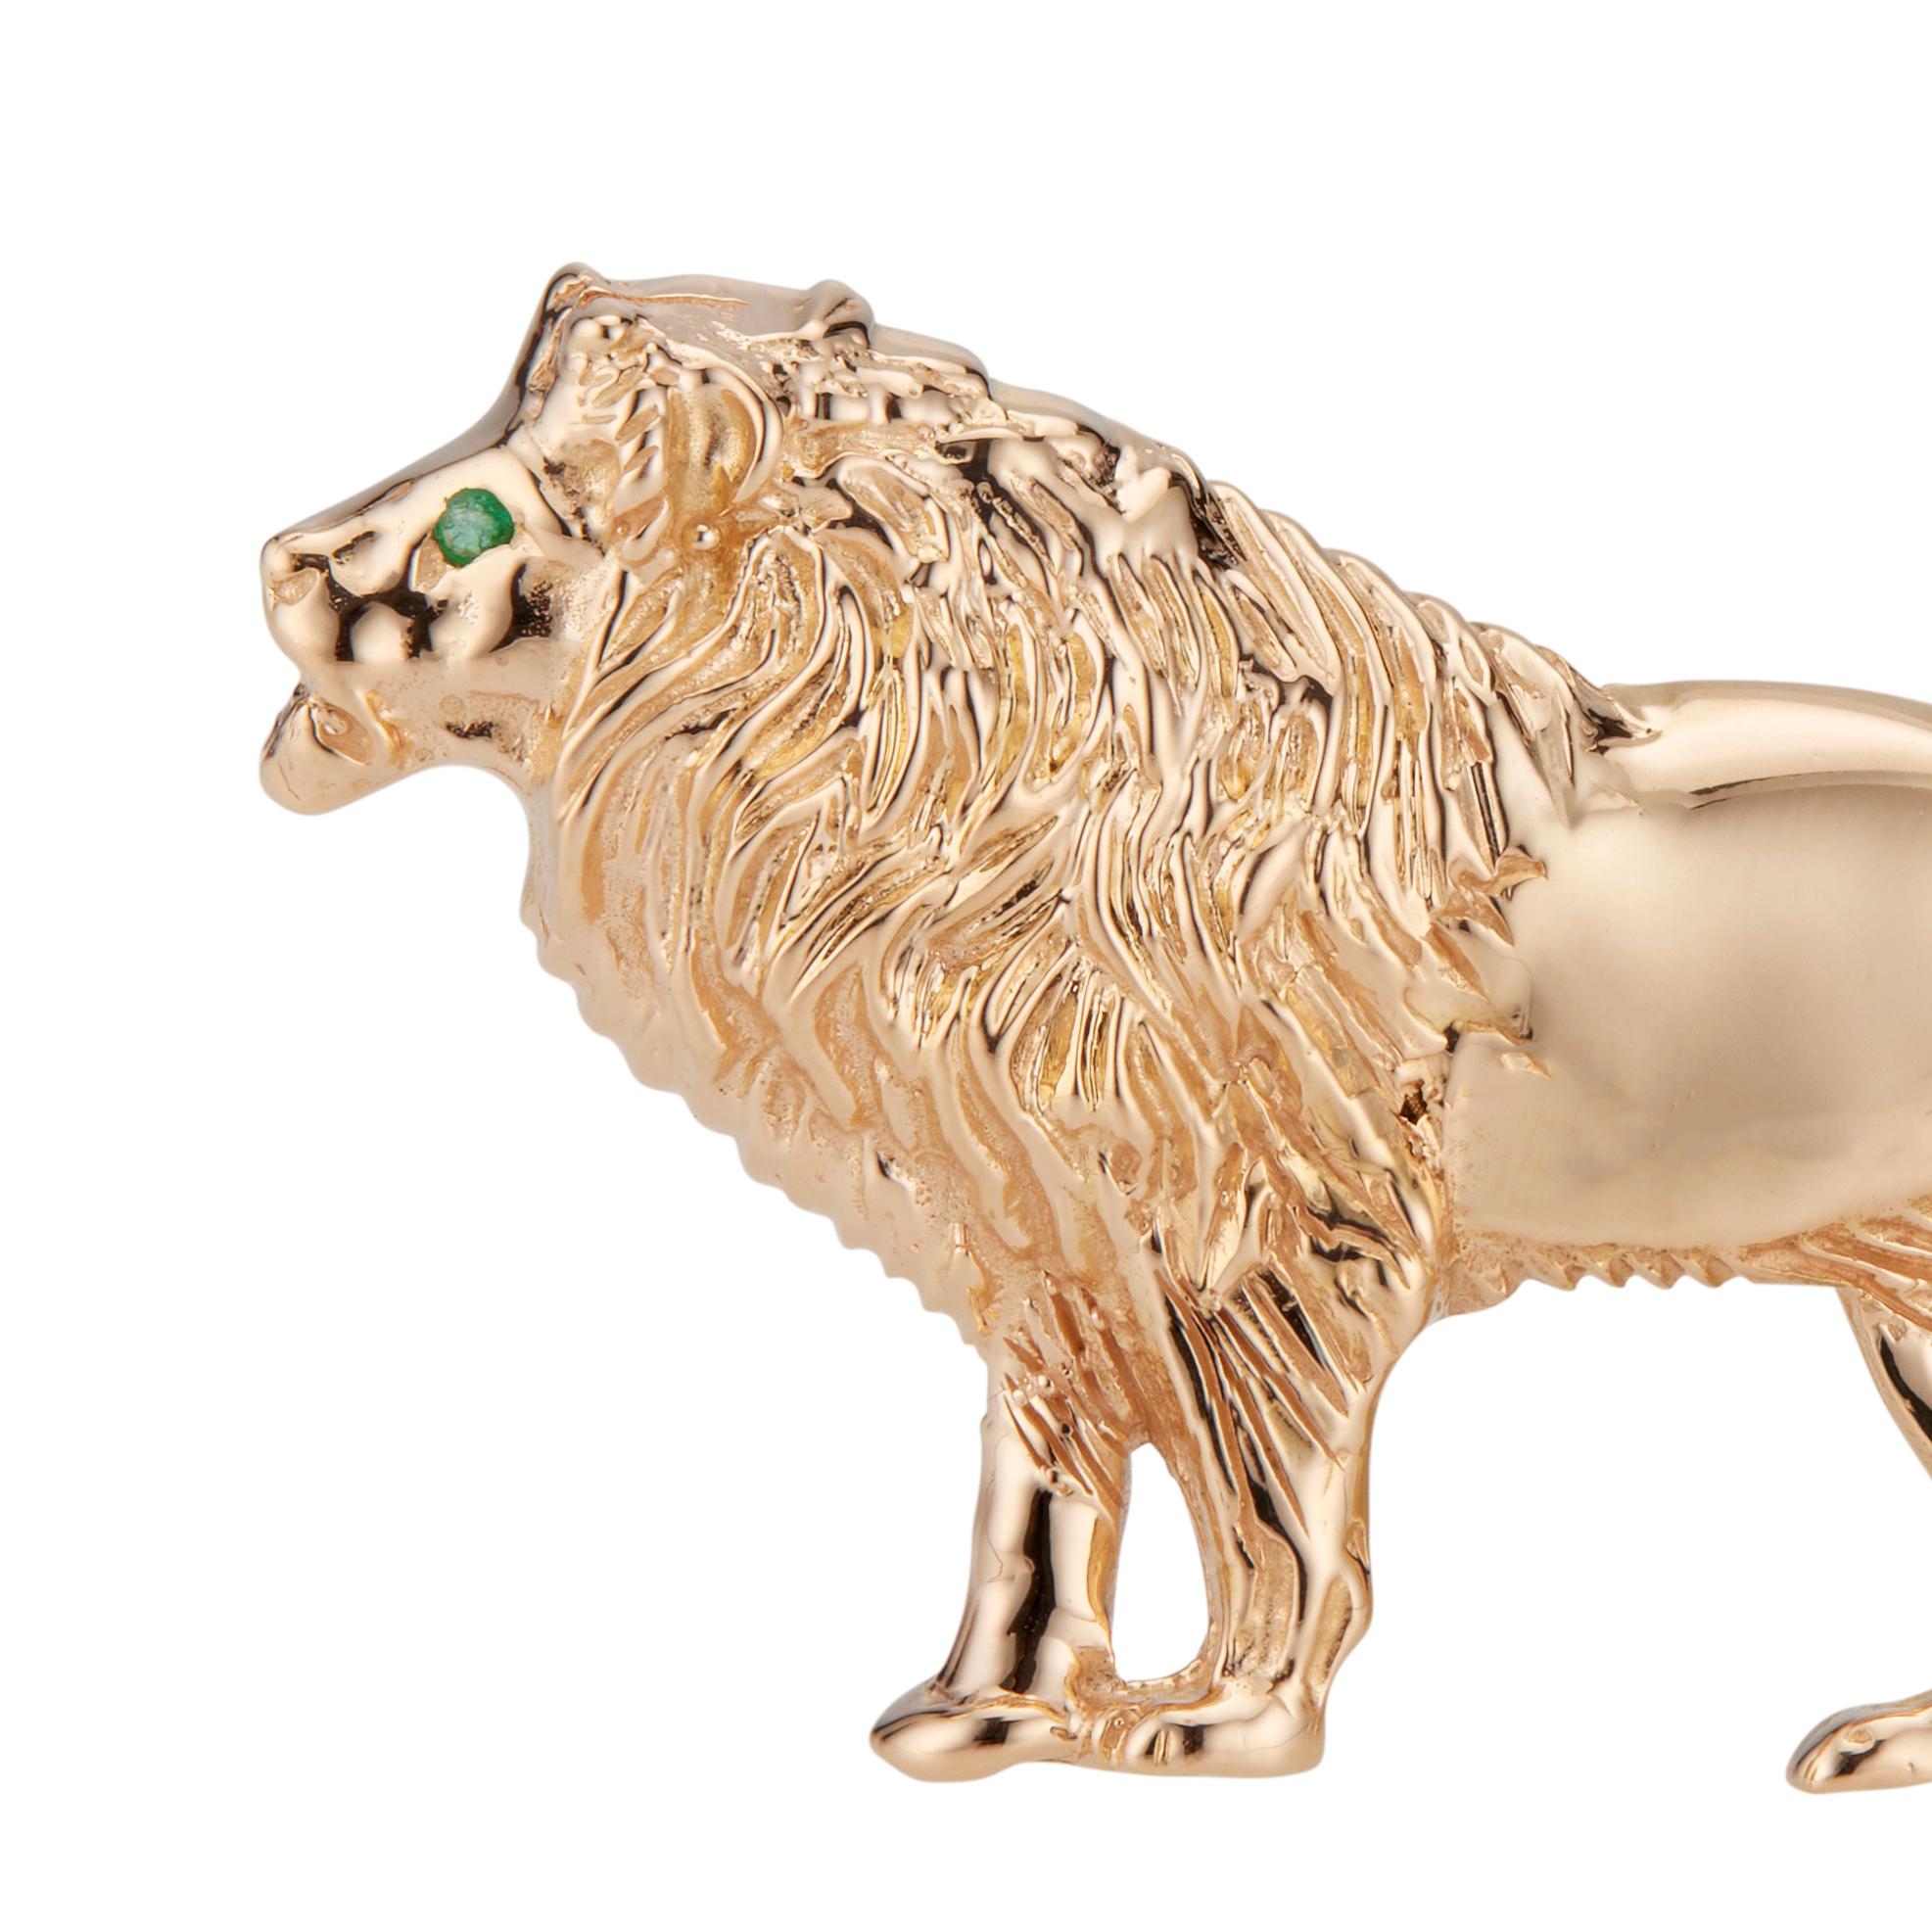 14k yellow gold lion brooch with 1 round fancy emerald eye. 

1 fancy emerald 
14k yellow gold
Length: 21.99 mm or 1.65inches 
Weight: 12.4 grams